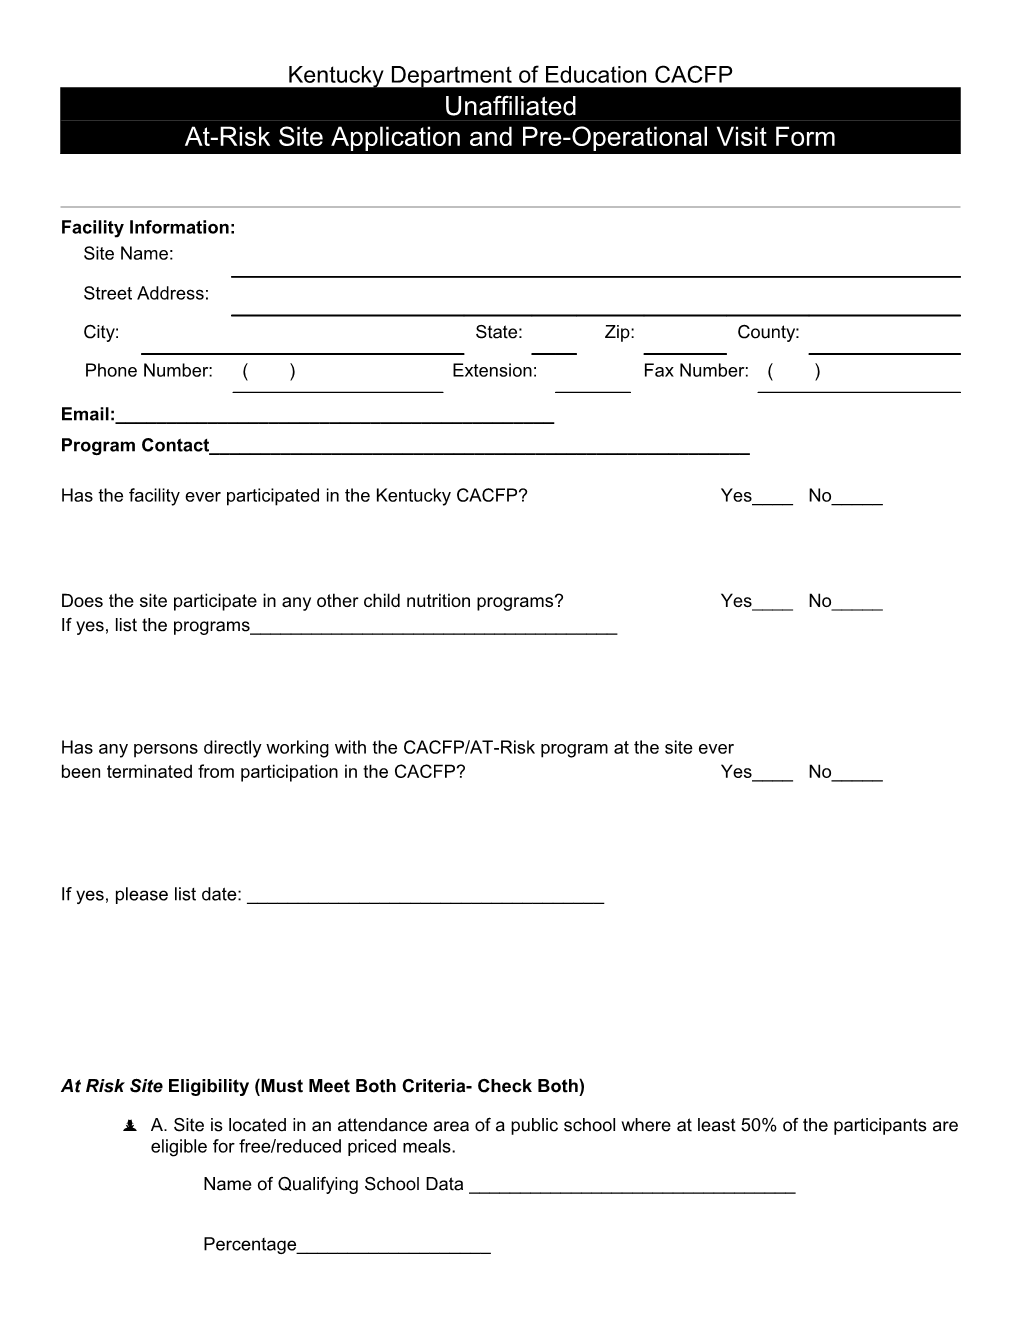 At-Risk Site Application and Pre-Operational Visit Form